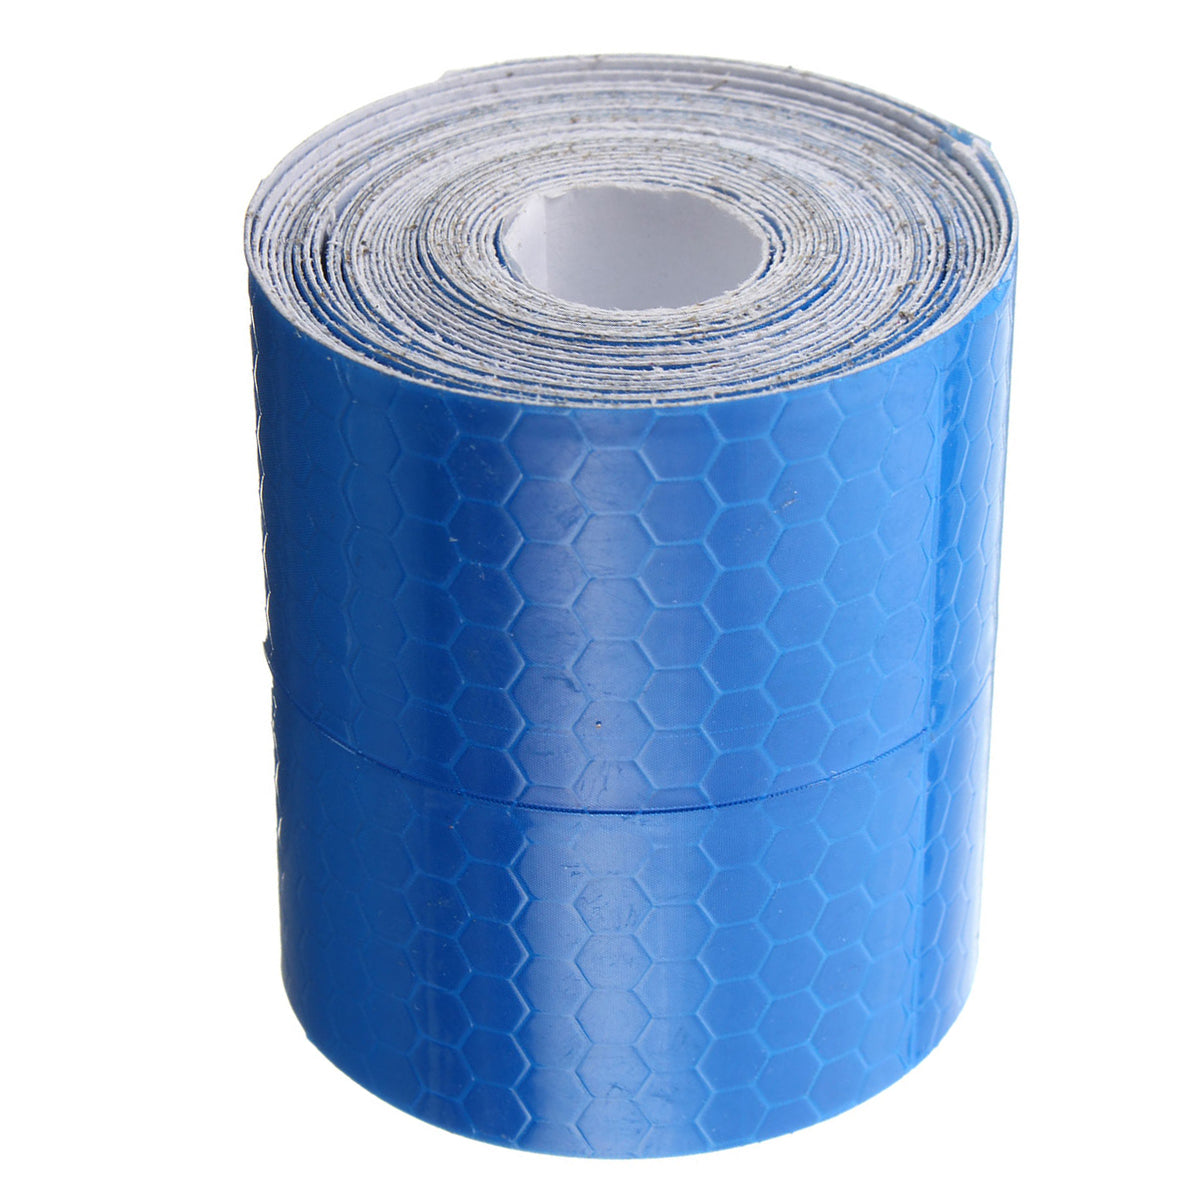 Steel Blue 5cm X 300cm Reflective Safety Warning Conspicuity Tape Film Car Sticker